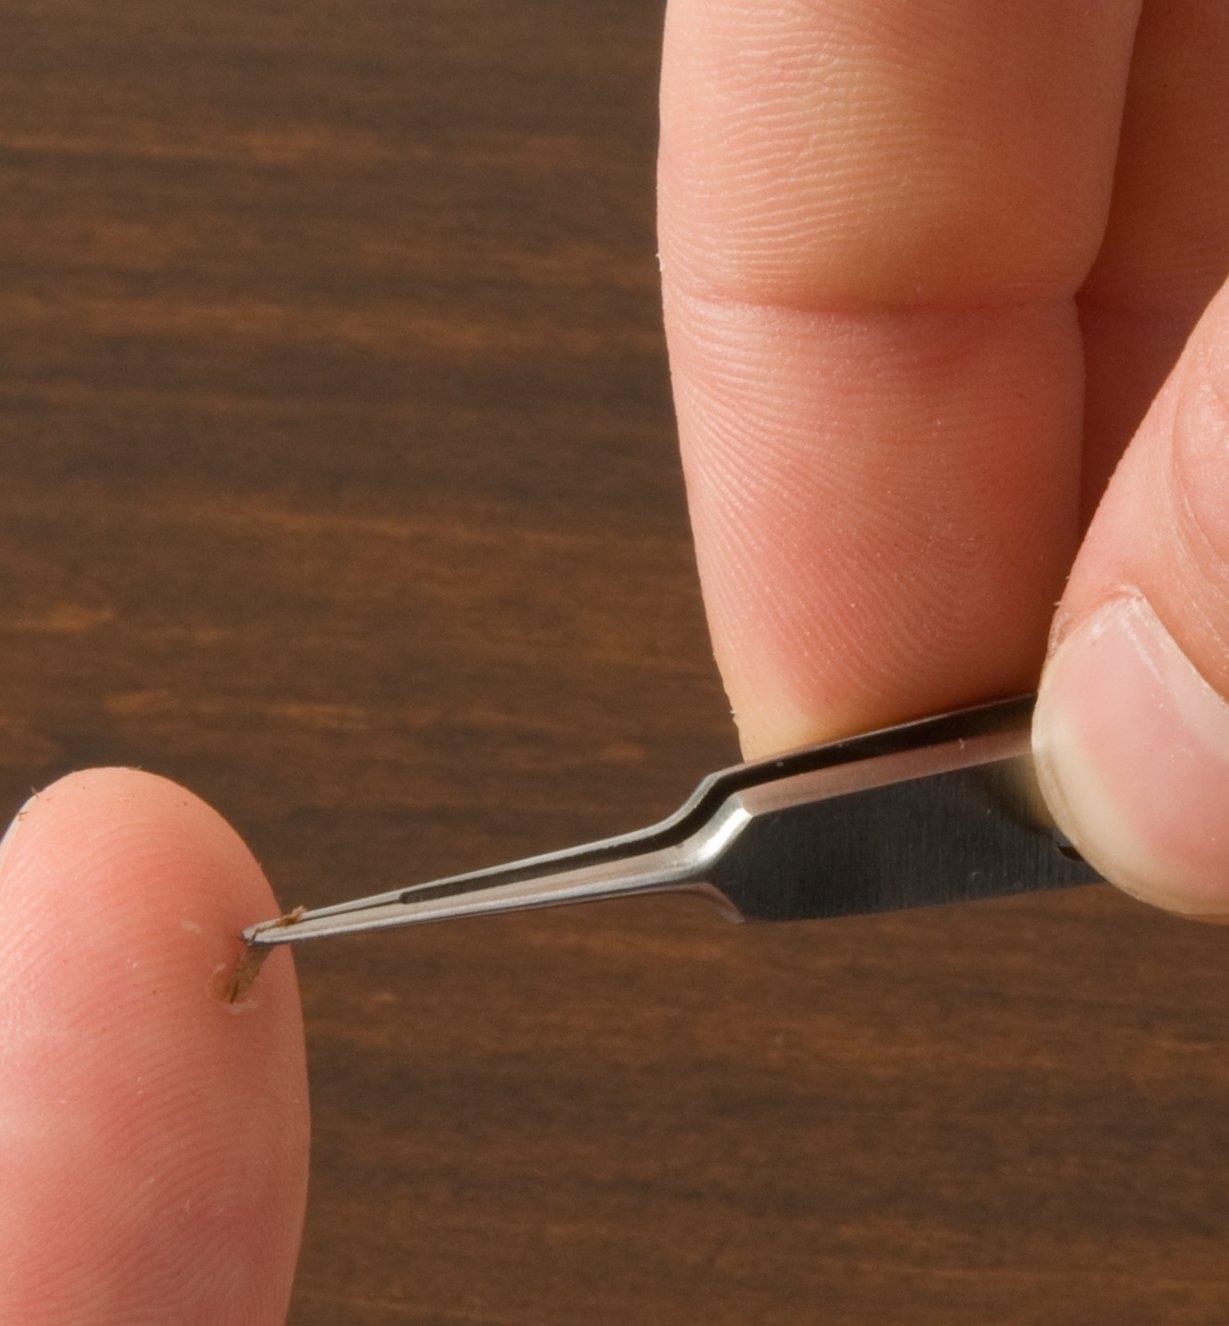 Using Corneal Tweezers to remove a sliver from a finger